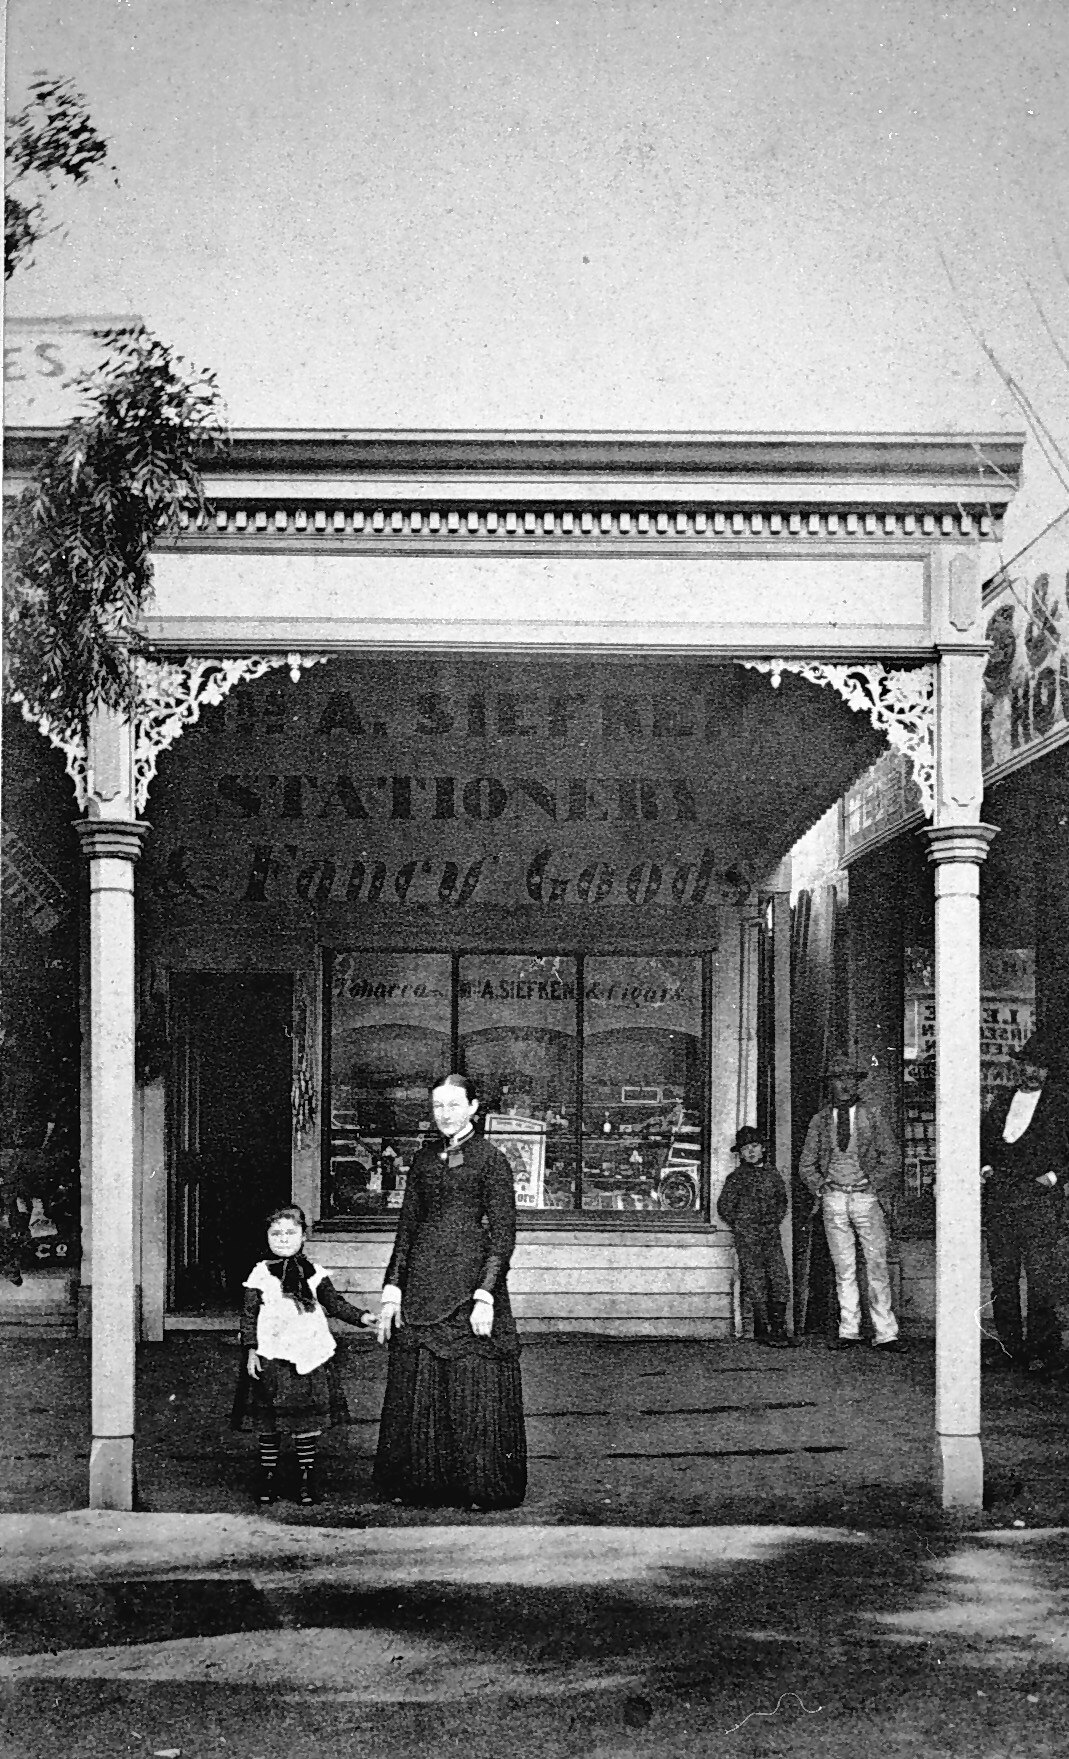 Negative - Woman & Child in Front of A. Siefker, Stationer & Fancy Goods, Echuca, Victoria, circa 1875